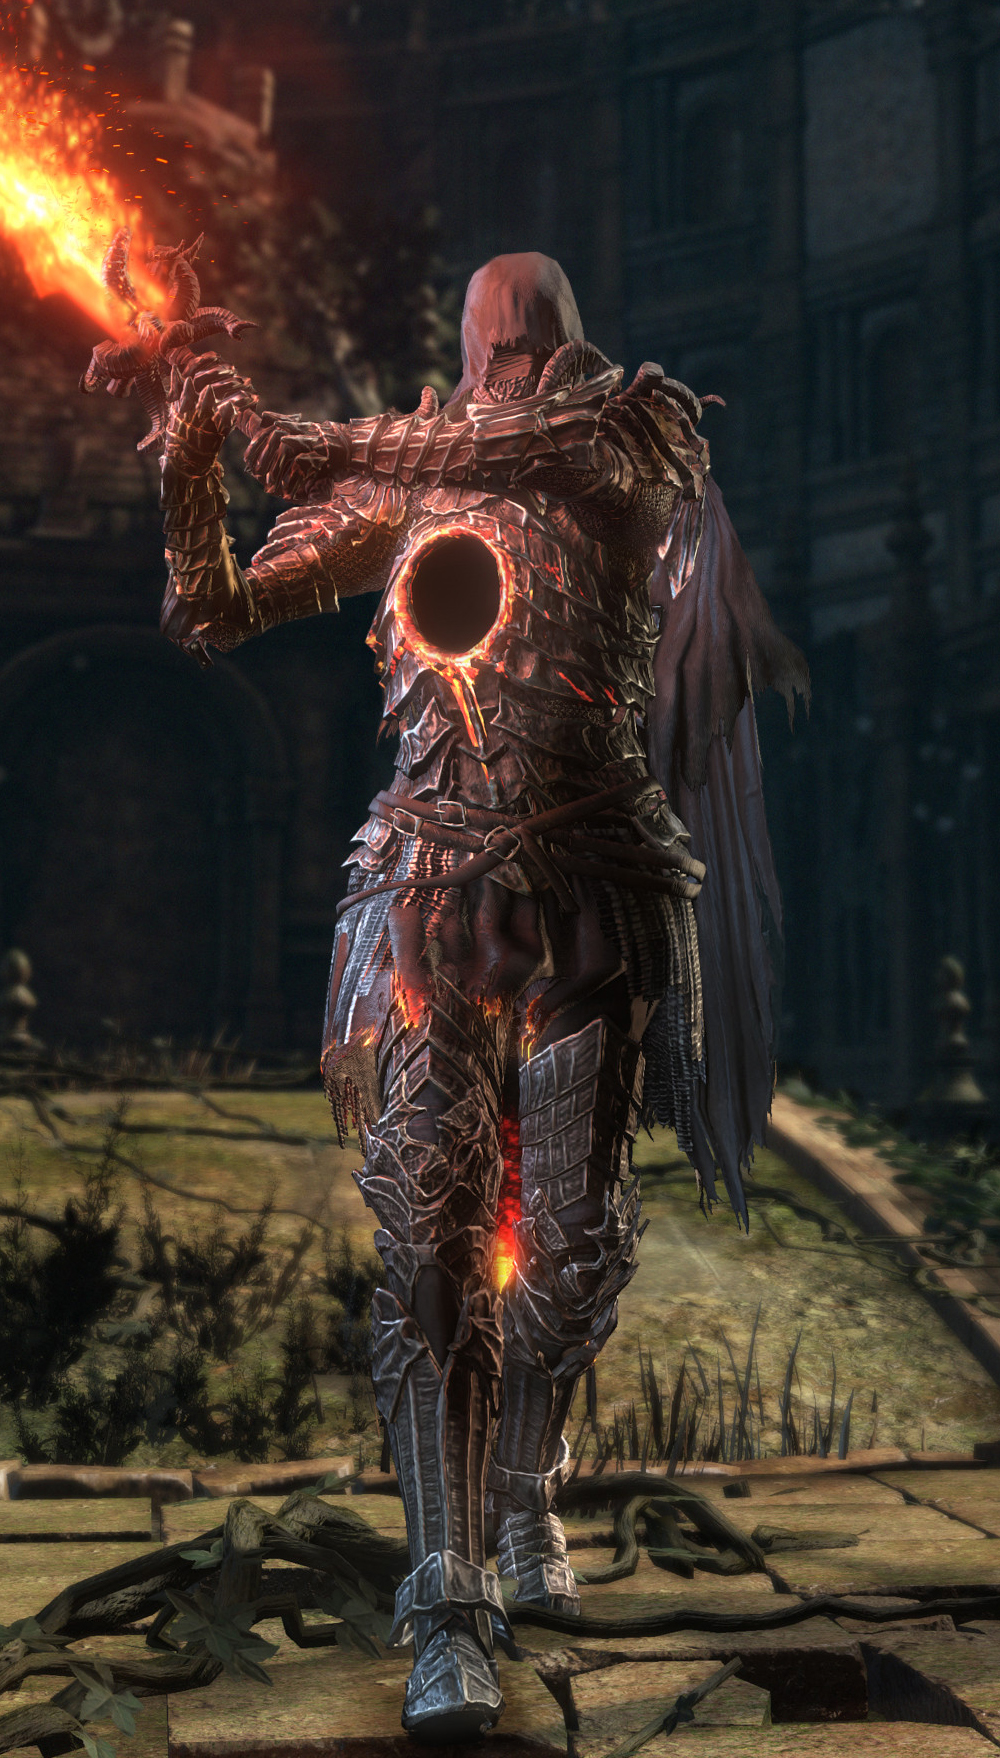 ds3 ringed city get past dragon